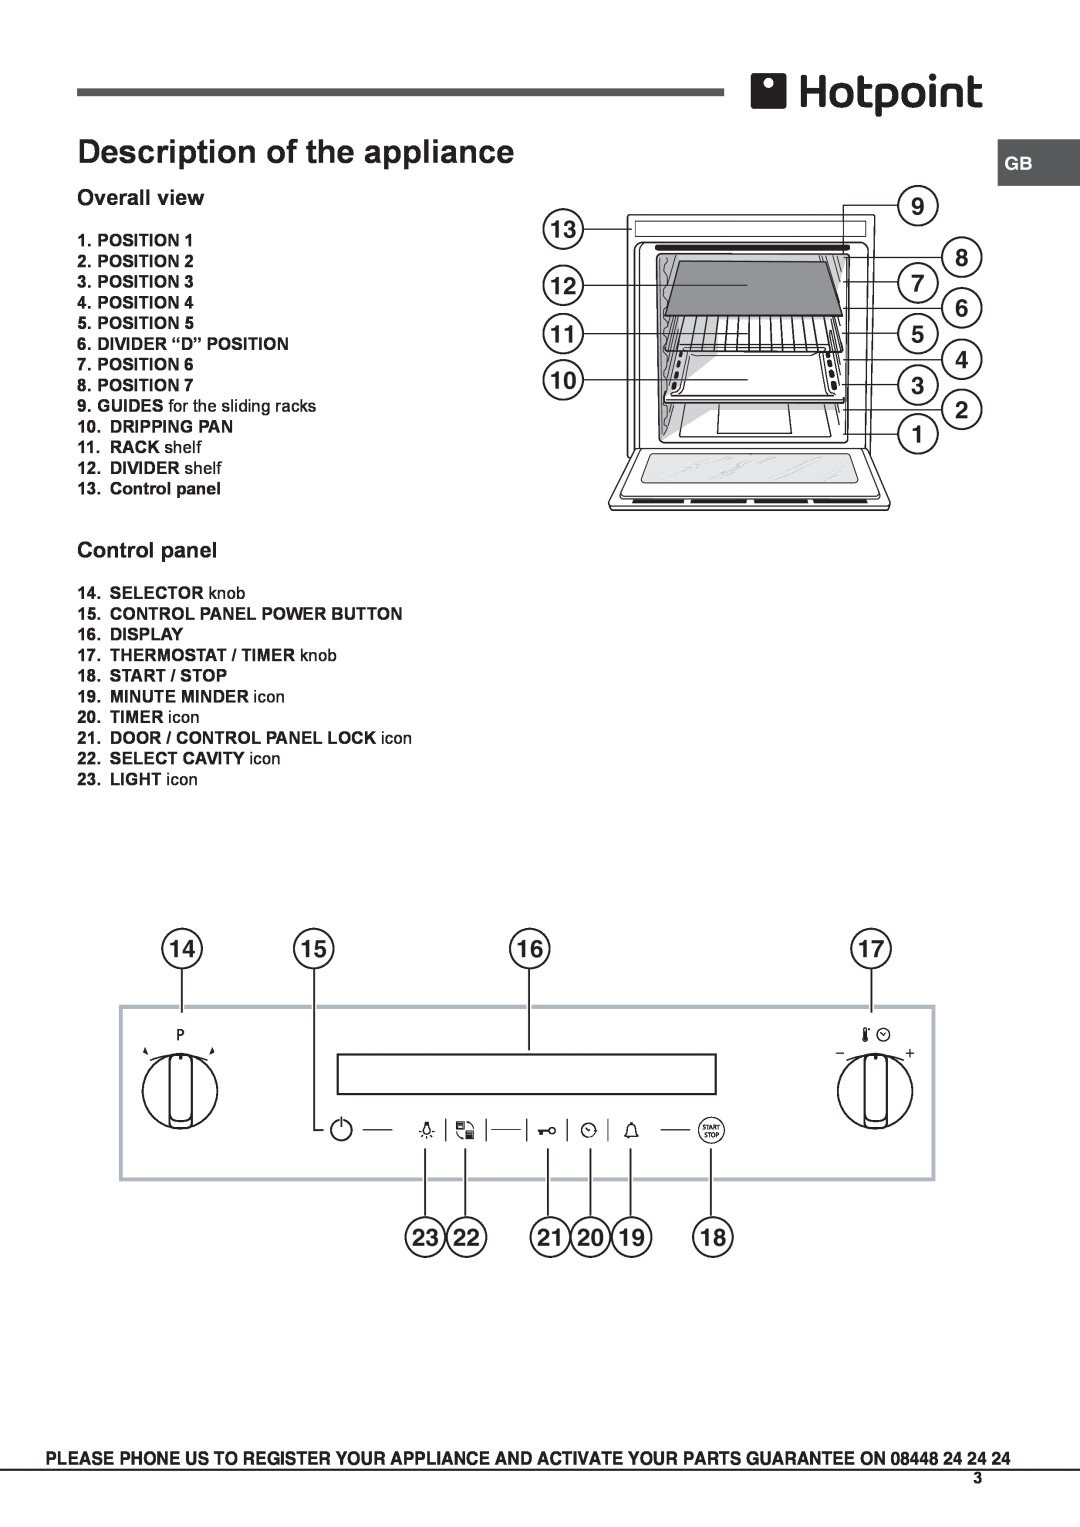 Hotpoint OSHS89EDC manual Description of the appliance, 9 8 7 6 5 4 3, Overall view, Control panel 